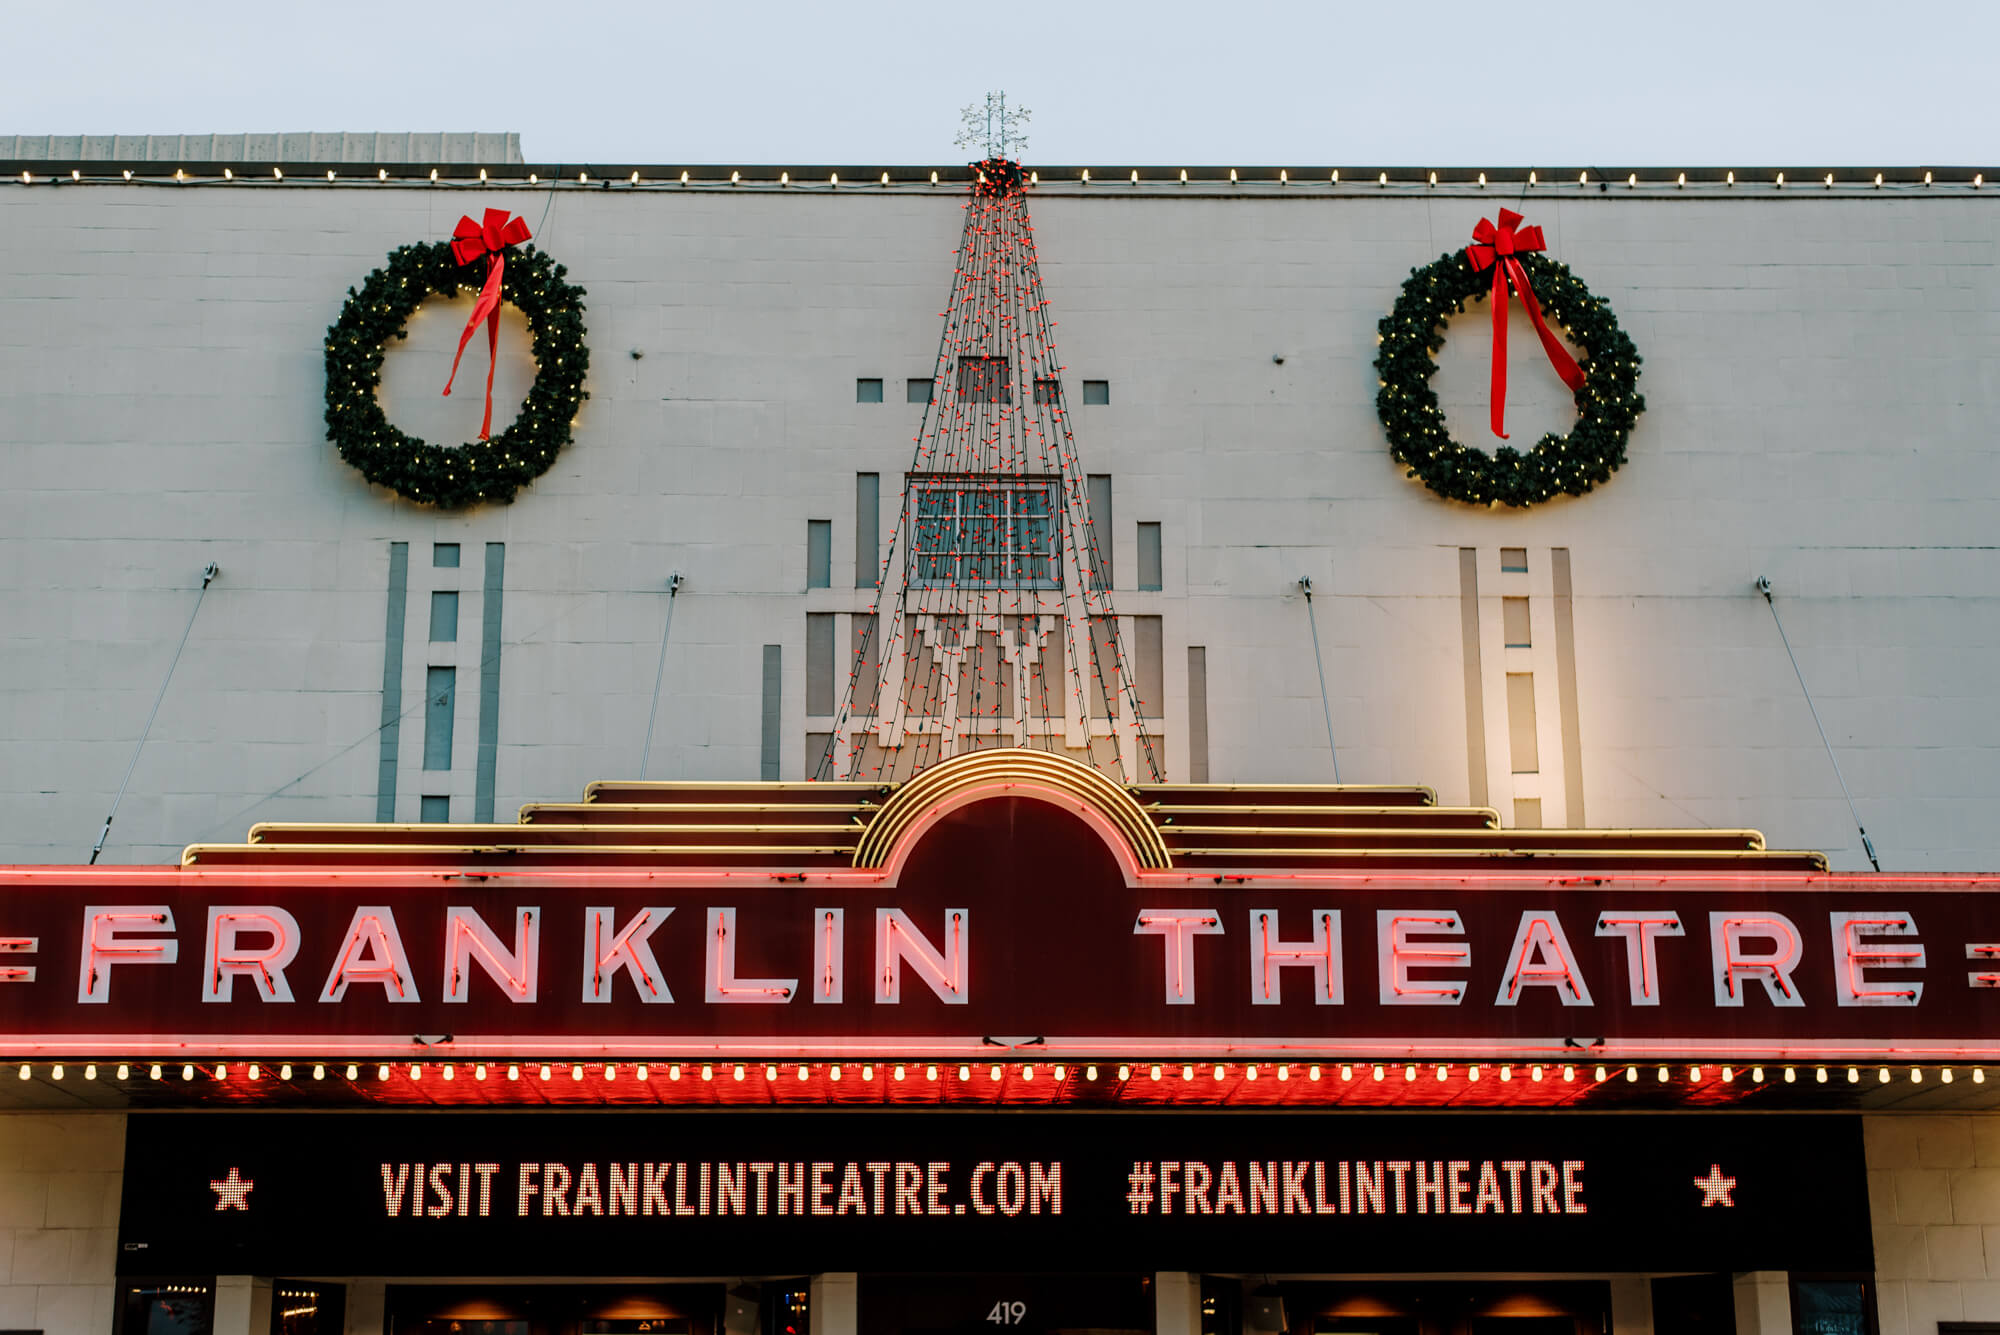 the franklin theatre in franklin, tennessee glows at sunset. there are two christmas wreaths hanging from the roof.